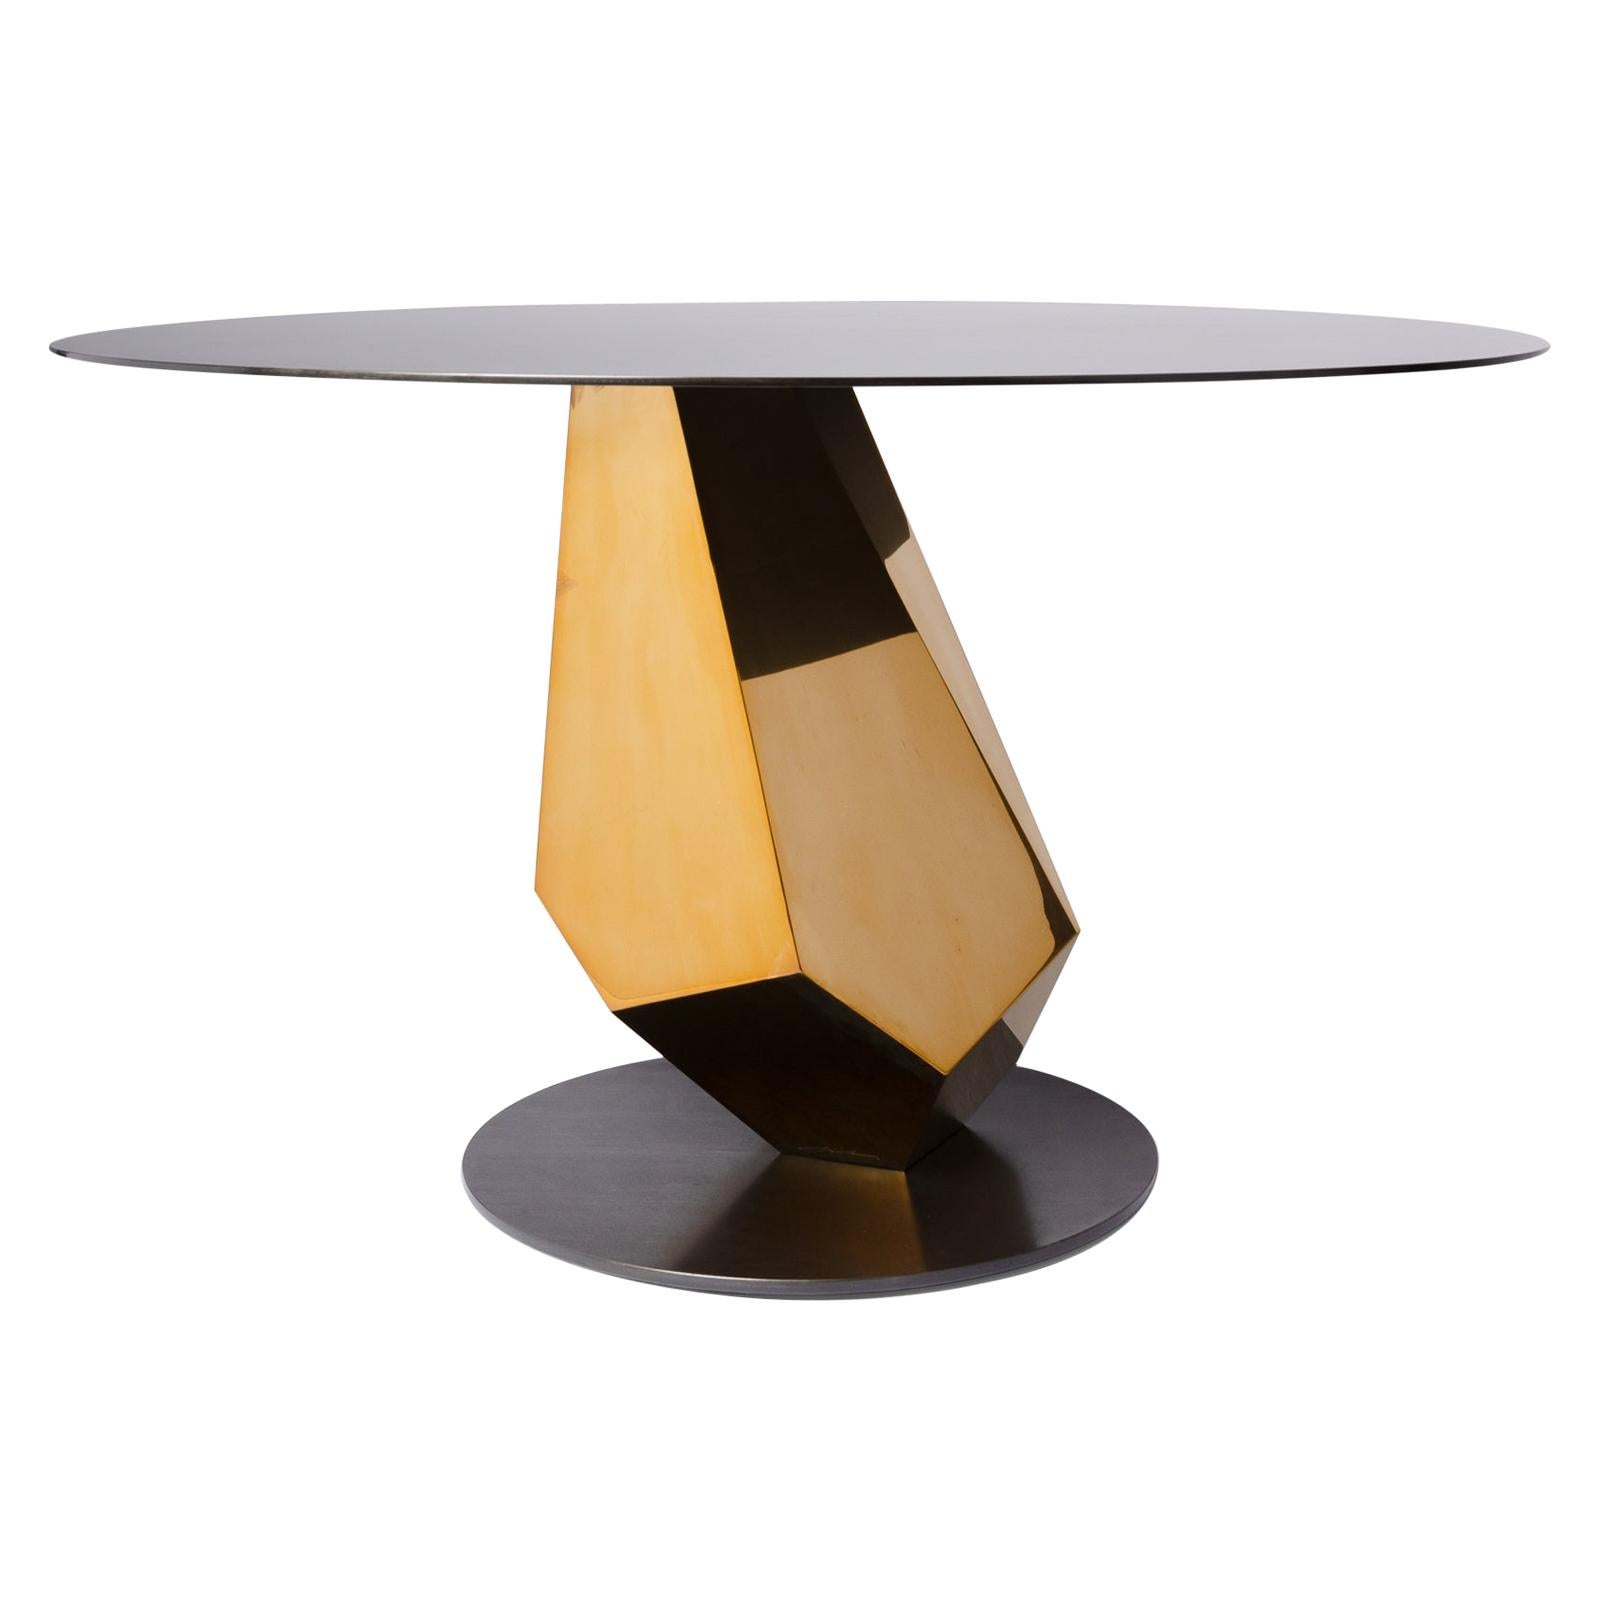 Geometric Sculptural Metal Table Mirror Polished Bronze & Blackened In Stock